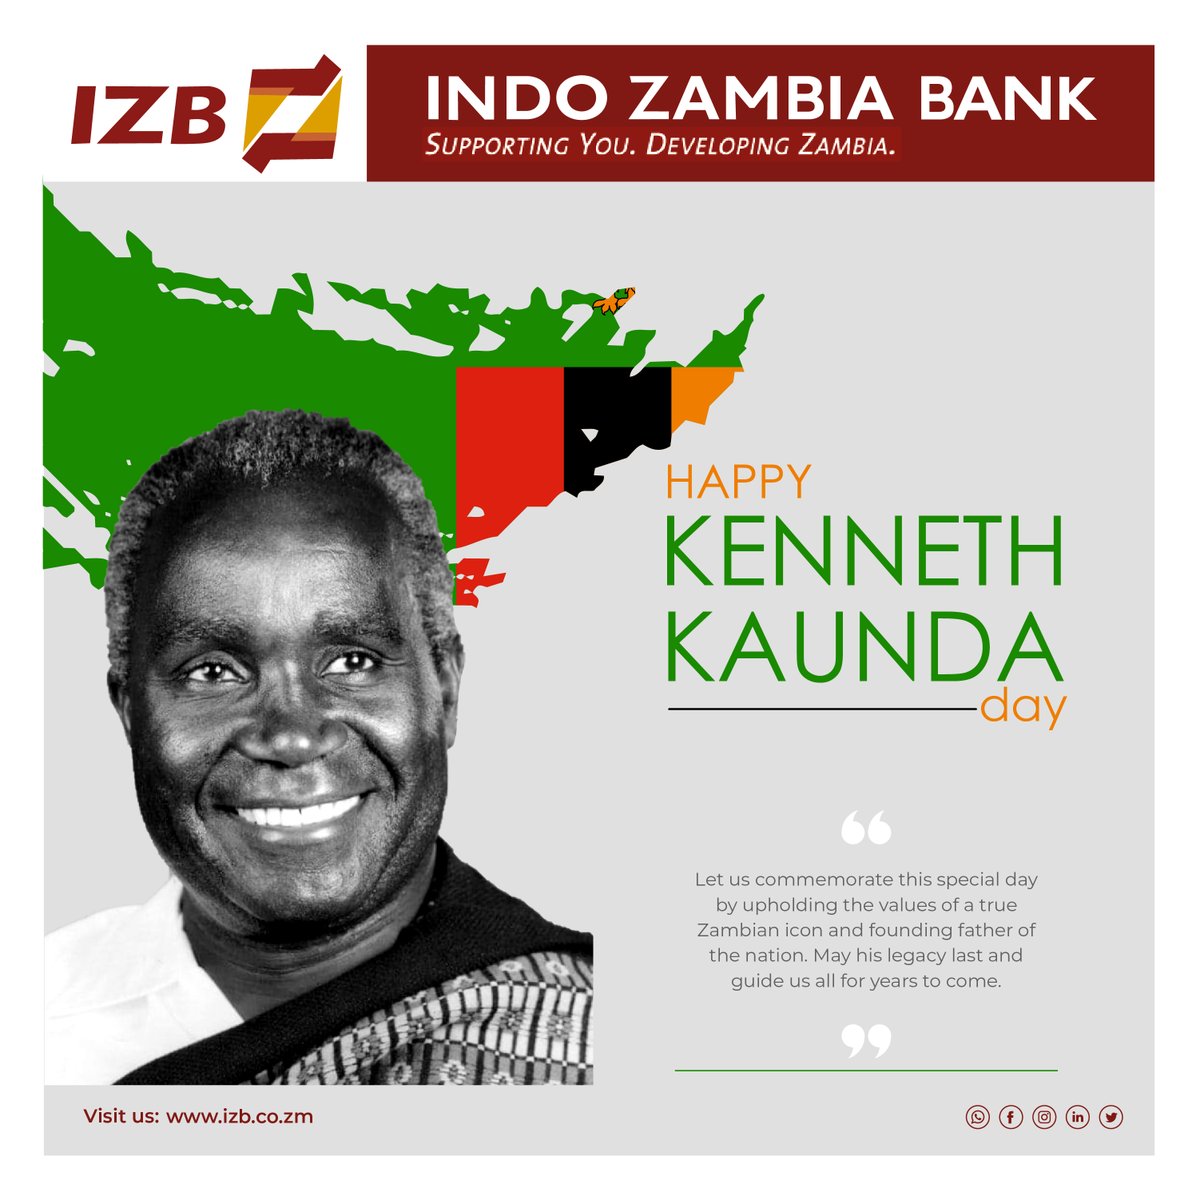 Happy Kenneth Kaunda Day
May his legacy last and guide us all for years to come.

#IndoZambiaBank #LetsGrowTogether #SupportingyouDevelopingZambia #IZB #HappyKennethKaundaDay #KennethKaunda #FoundingFather #FirstPresident #Zambia